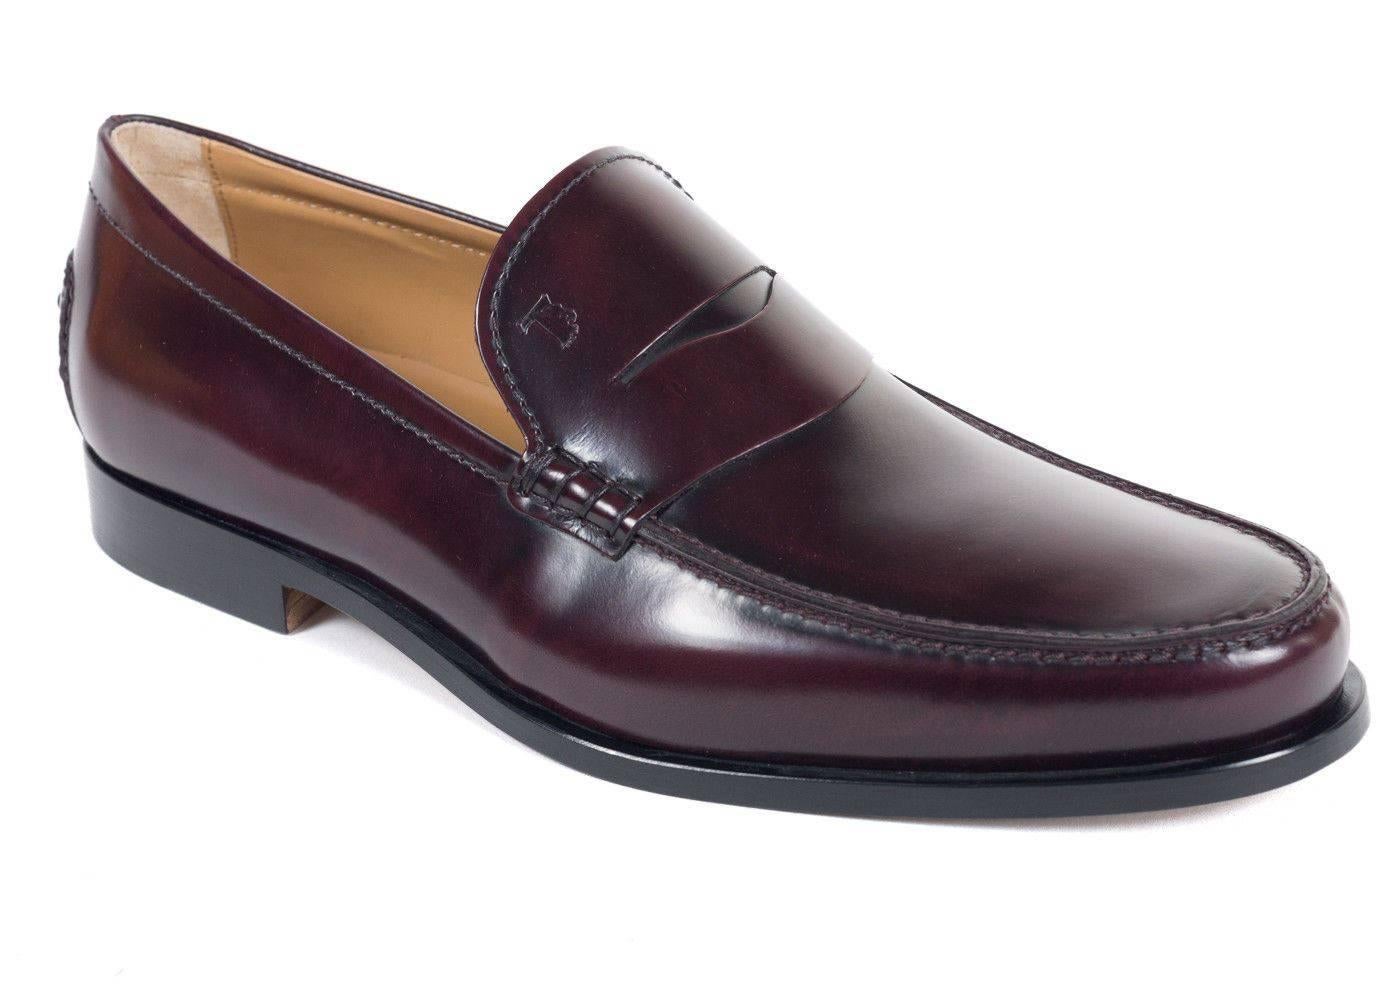 Brand New Tod's Men's Loafers
Original Box & Dust Bag Included
Retails in Stores & Online for $475
Size UK7 / US8
All Shoes are in UK Sizing


Tod's classic penny loafers crafted in burgundy calfskin leather for an ultra smooth look to these shoes.